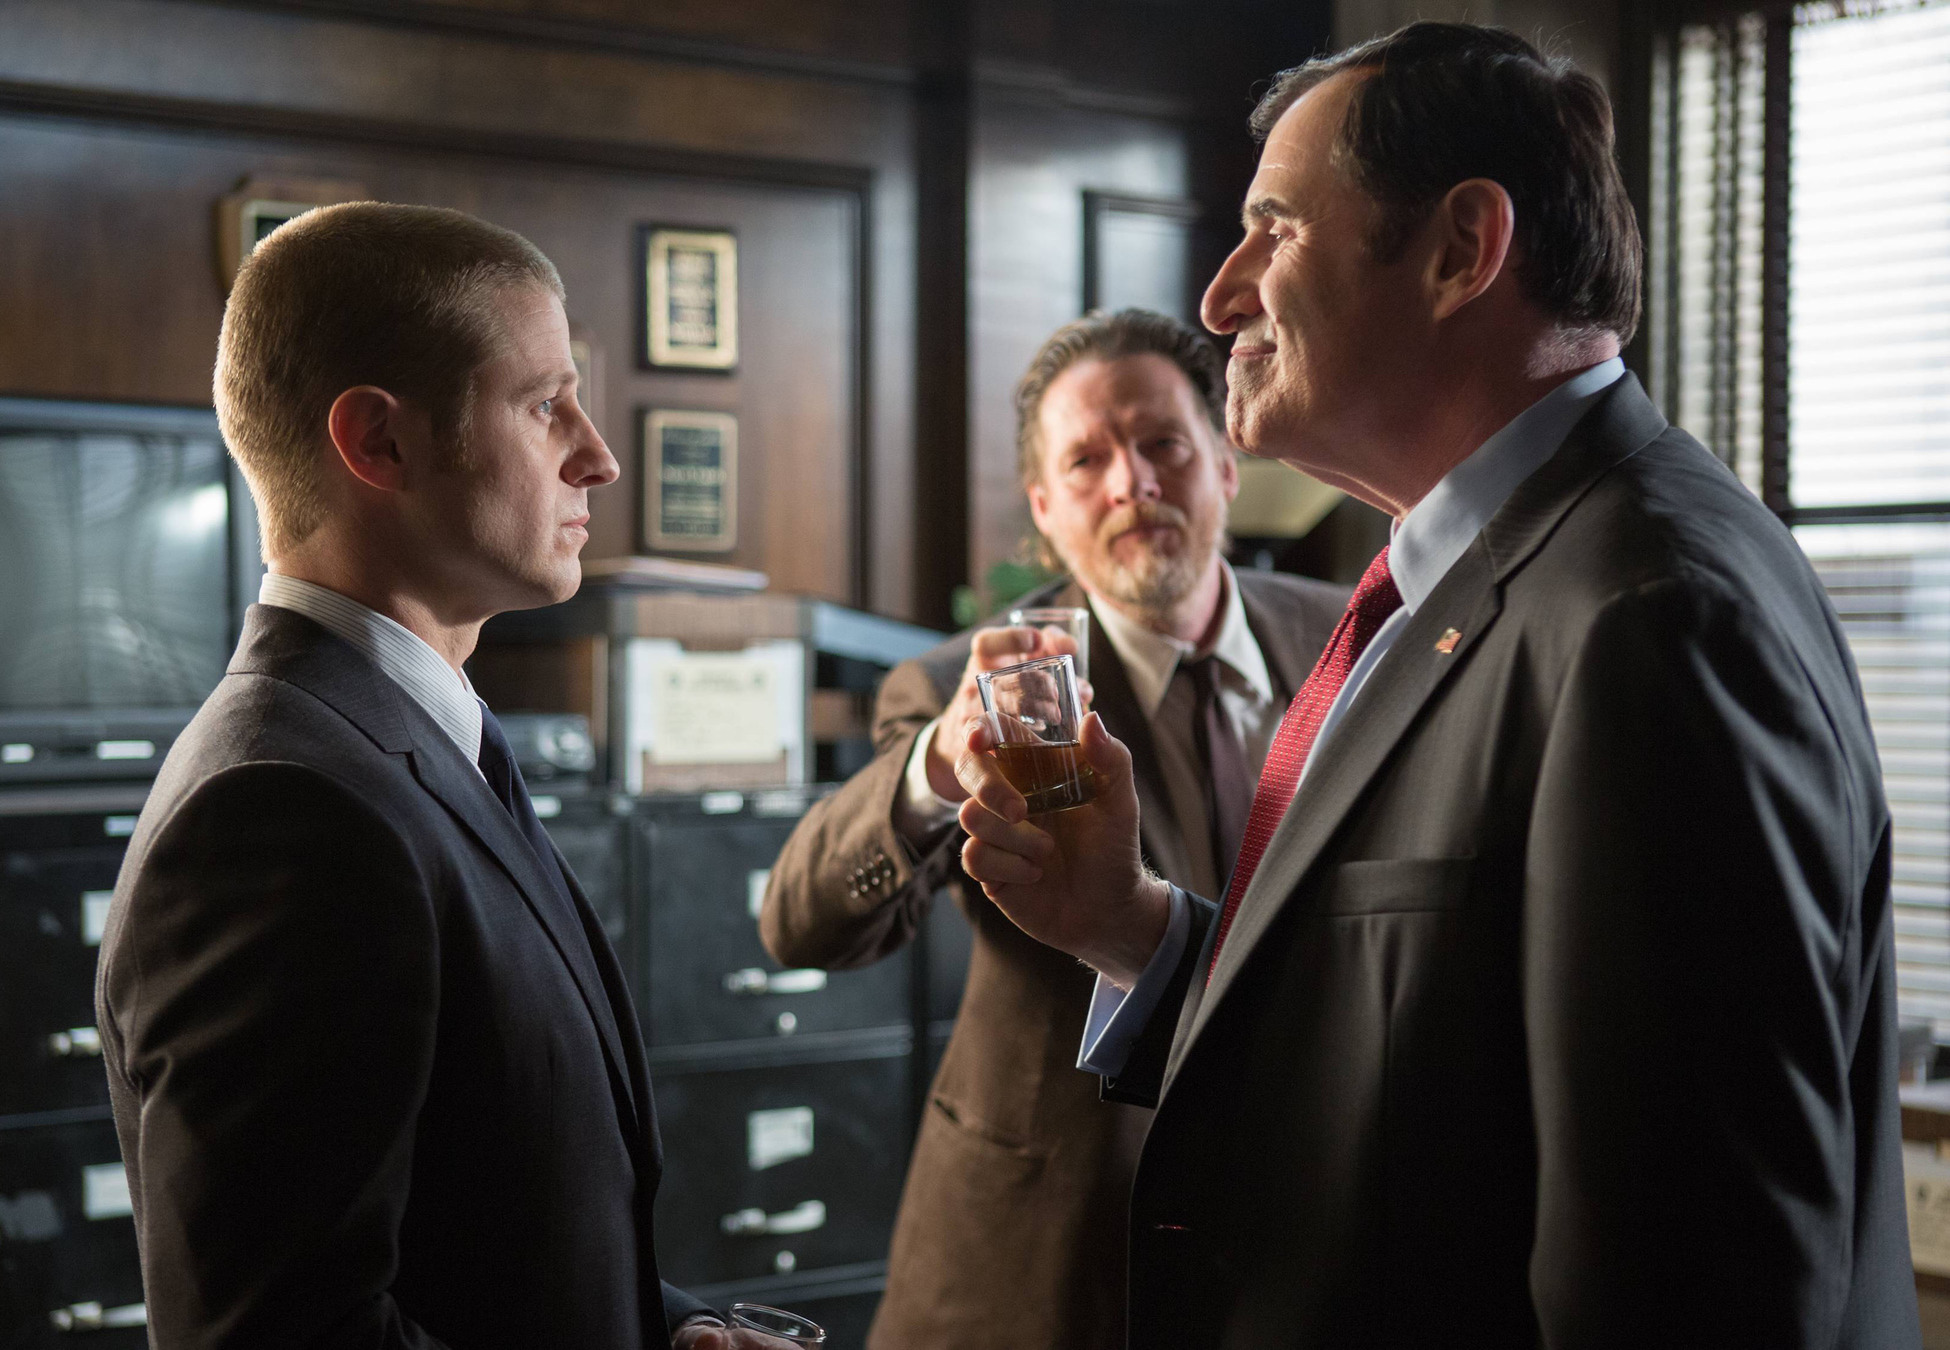 GOTHAM: Detectives Gordon (Ben McKenzie, L) and Bullock (Donal Logue, C) are commended by the Mayor (guest star Richard Kind, R) in the "Selina Kyle" episode of GOTHAM airing Monday, Sept. 29 (8:00-9:00 PM ET/PT) on FOX. Â©2014 Fox Broadcasting Co. Cr: Jessica Miglio/FOX